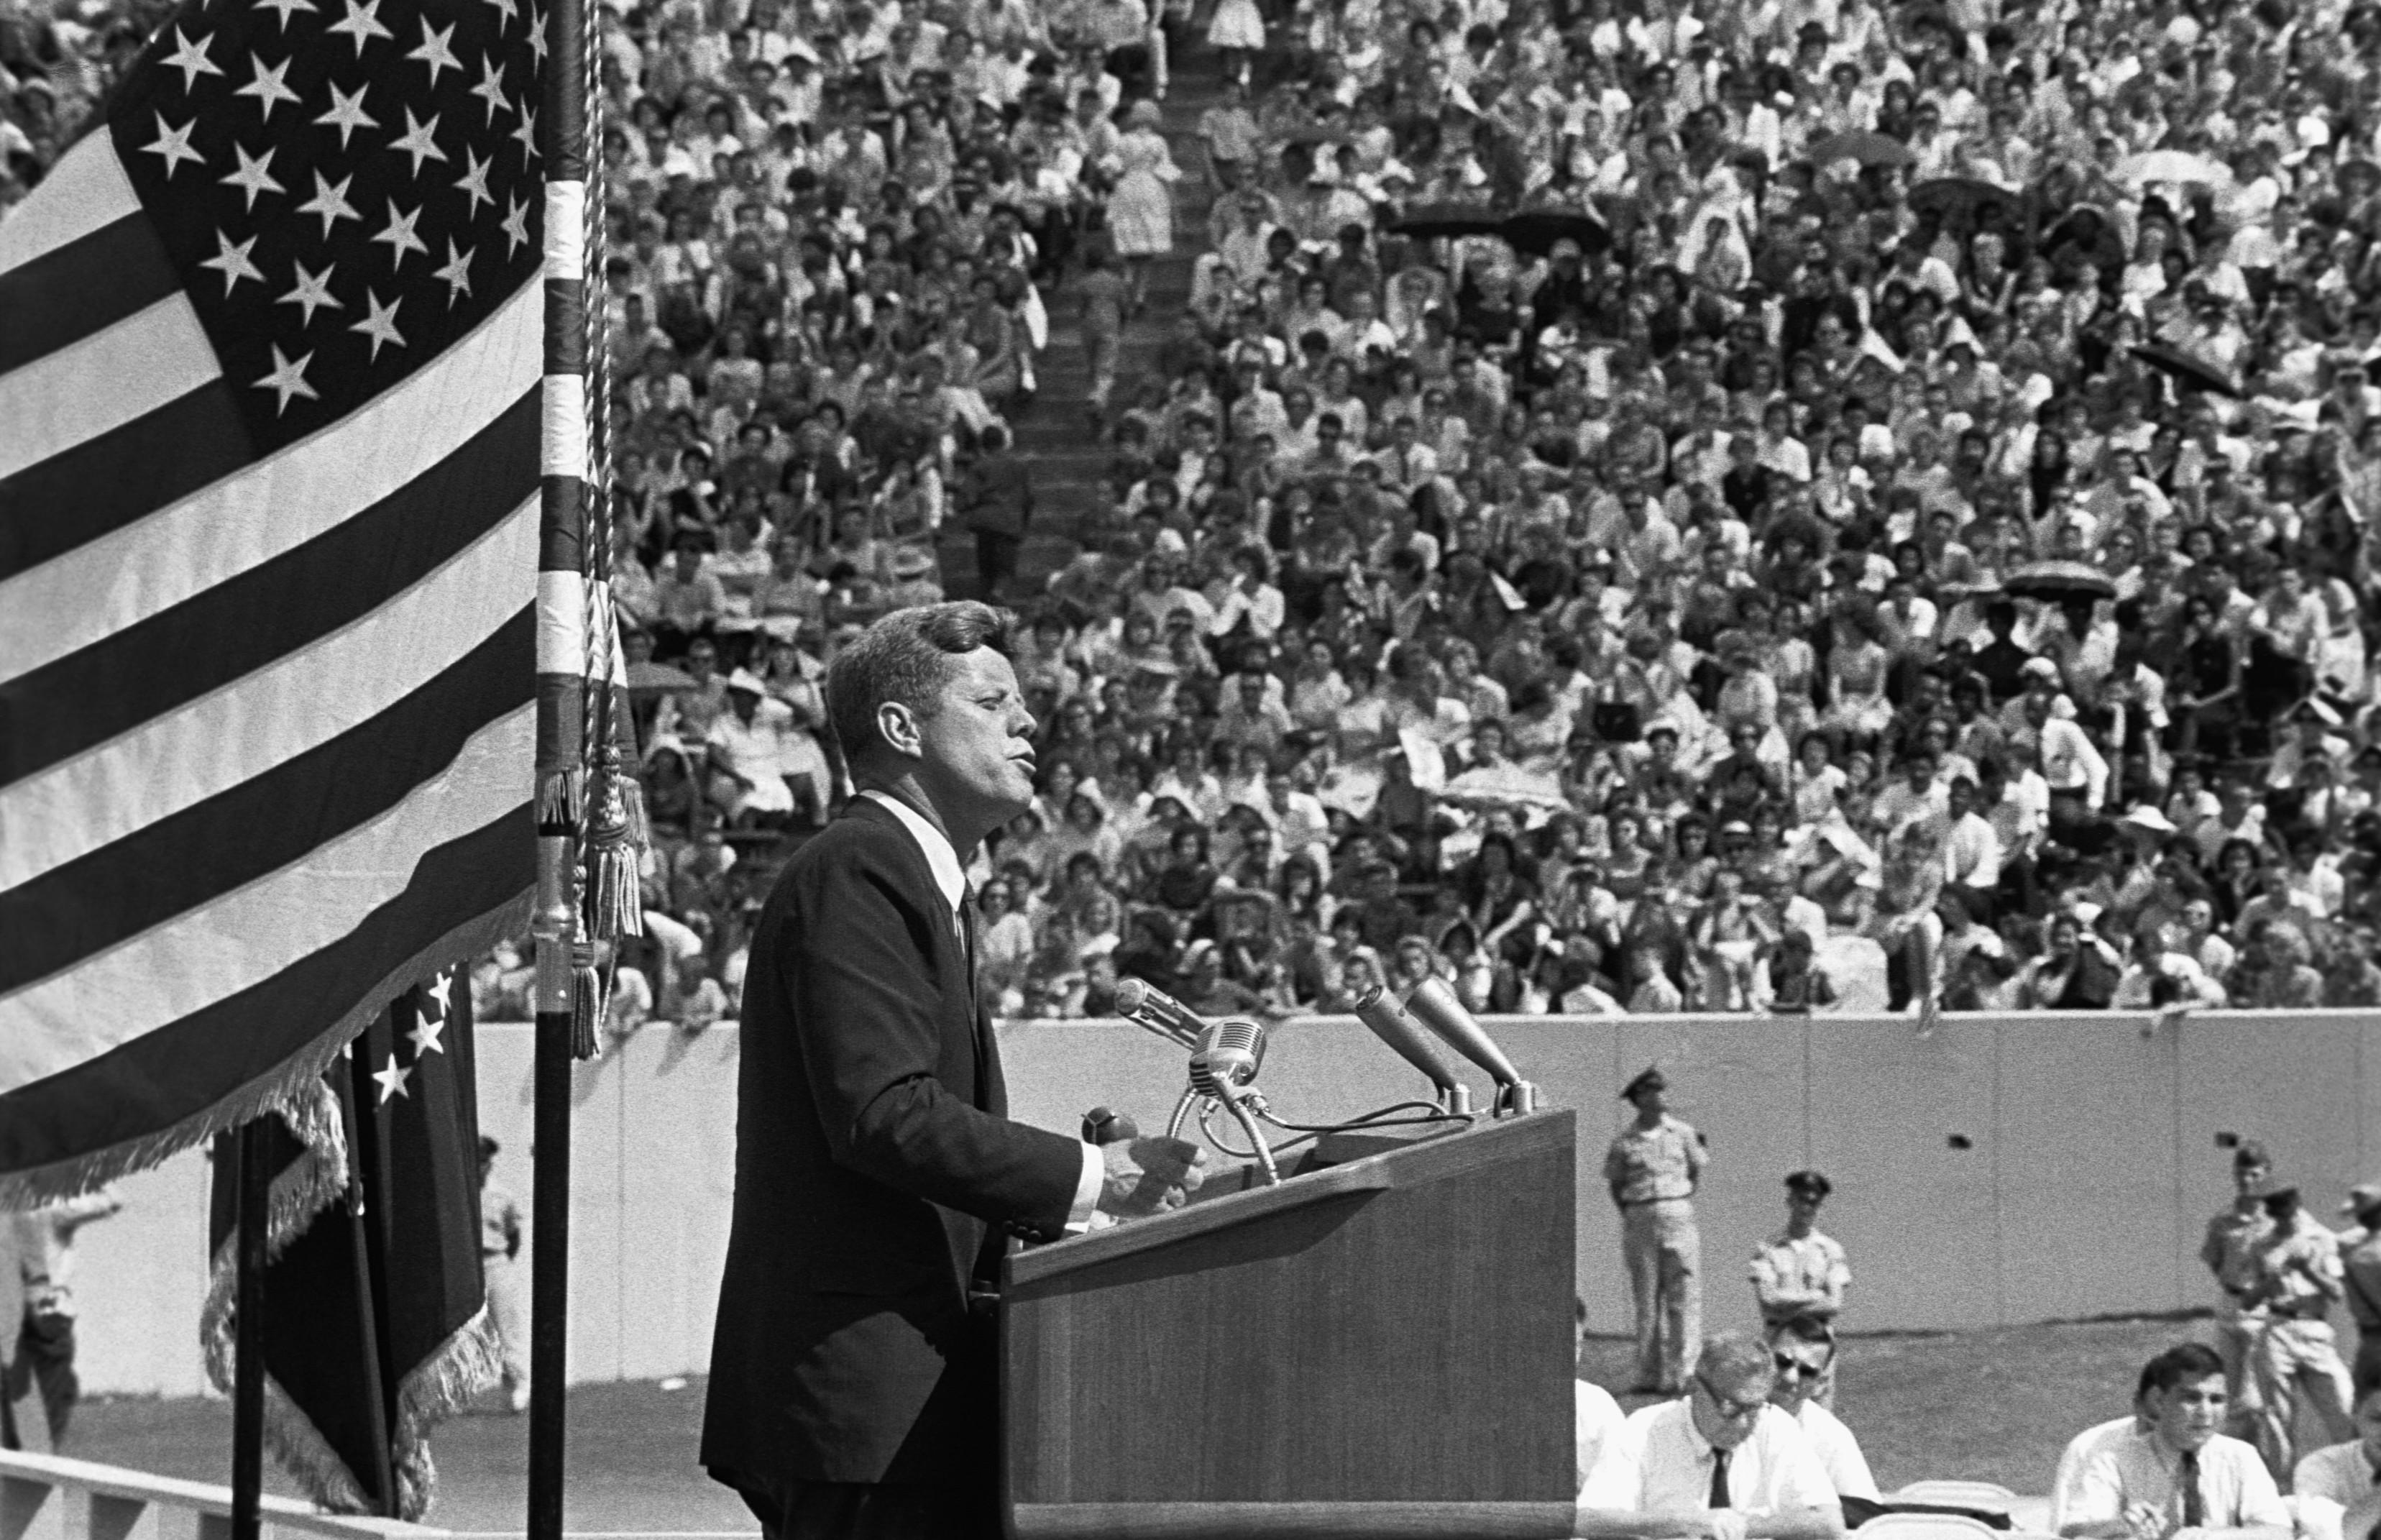 12 Sep 1962, Rice University, Houston, Texas, USA --- President Kennedy gives his 'Race for Space' speech at Houston's Rice University. Texas, September 12, 1962. --- Image by © CORBIS